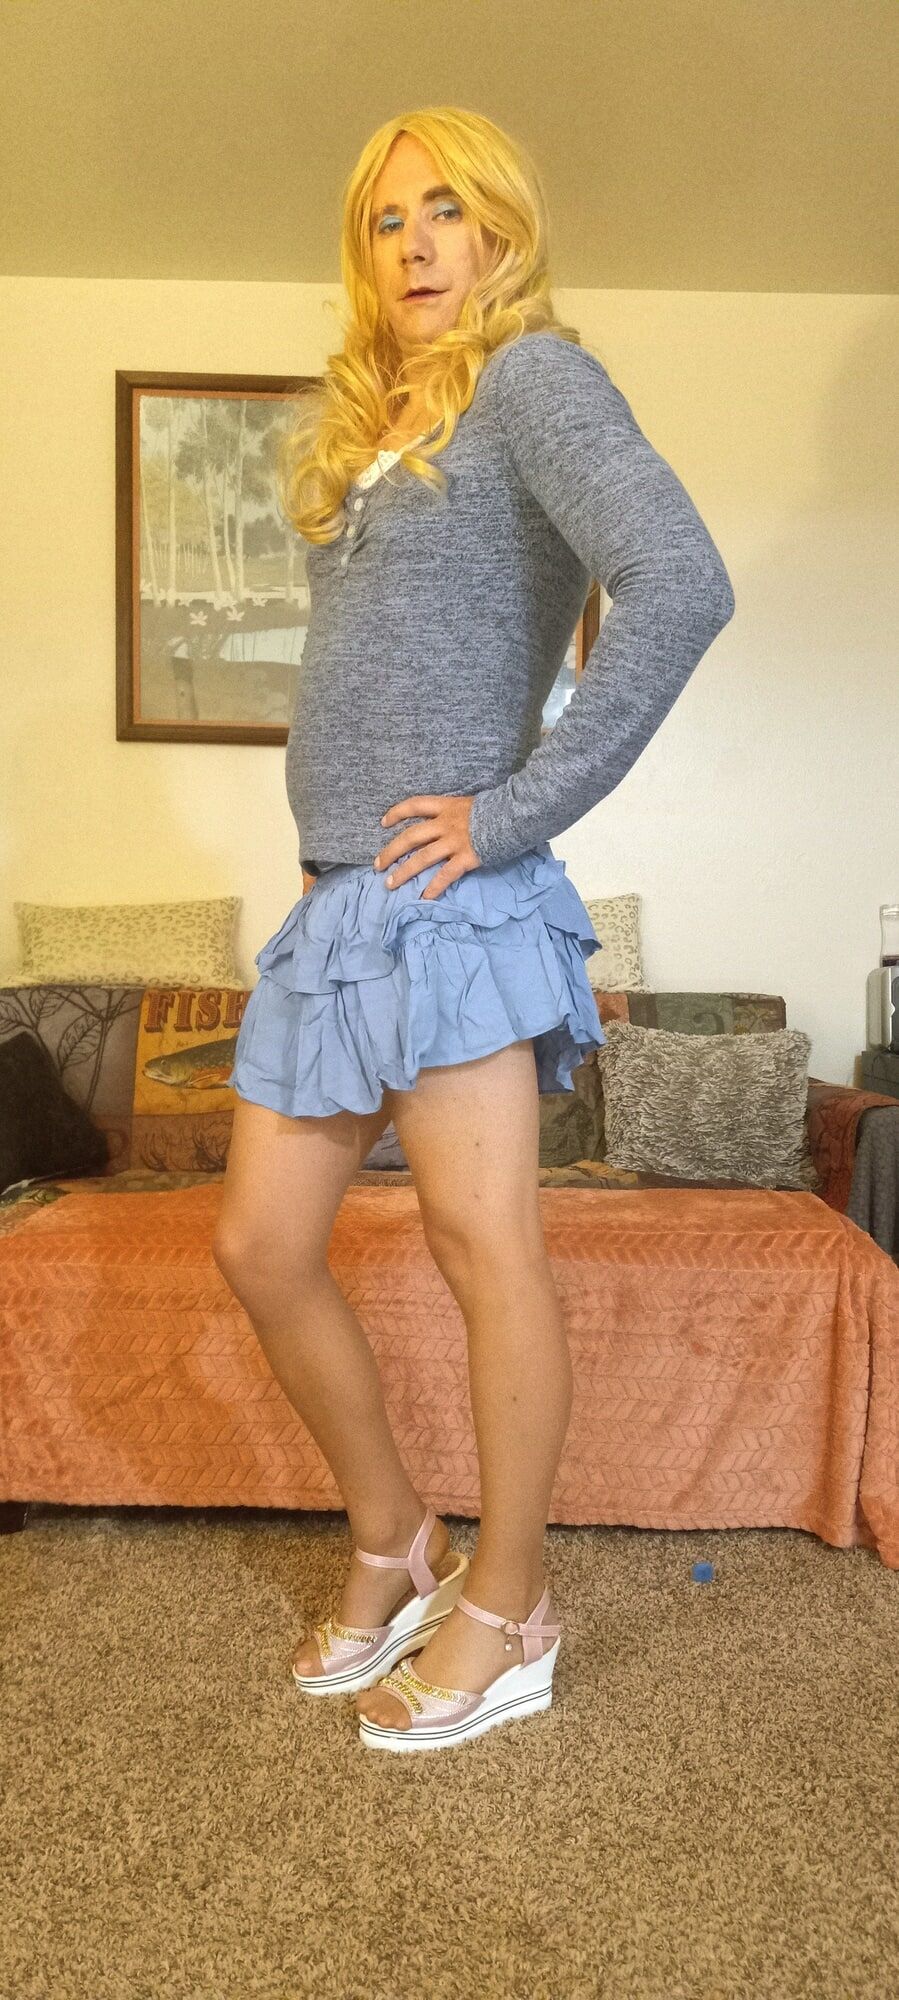 Sissy crossdresser Erica first showing of her girly face #18